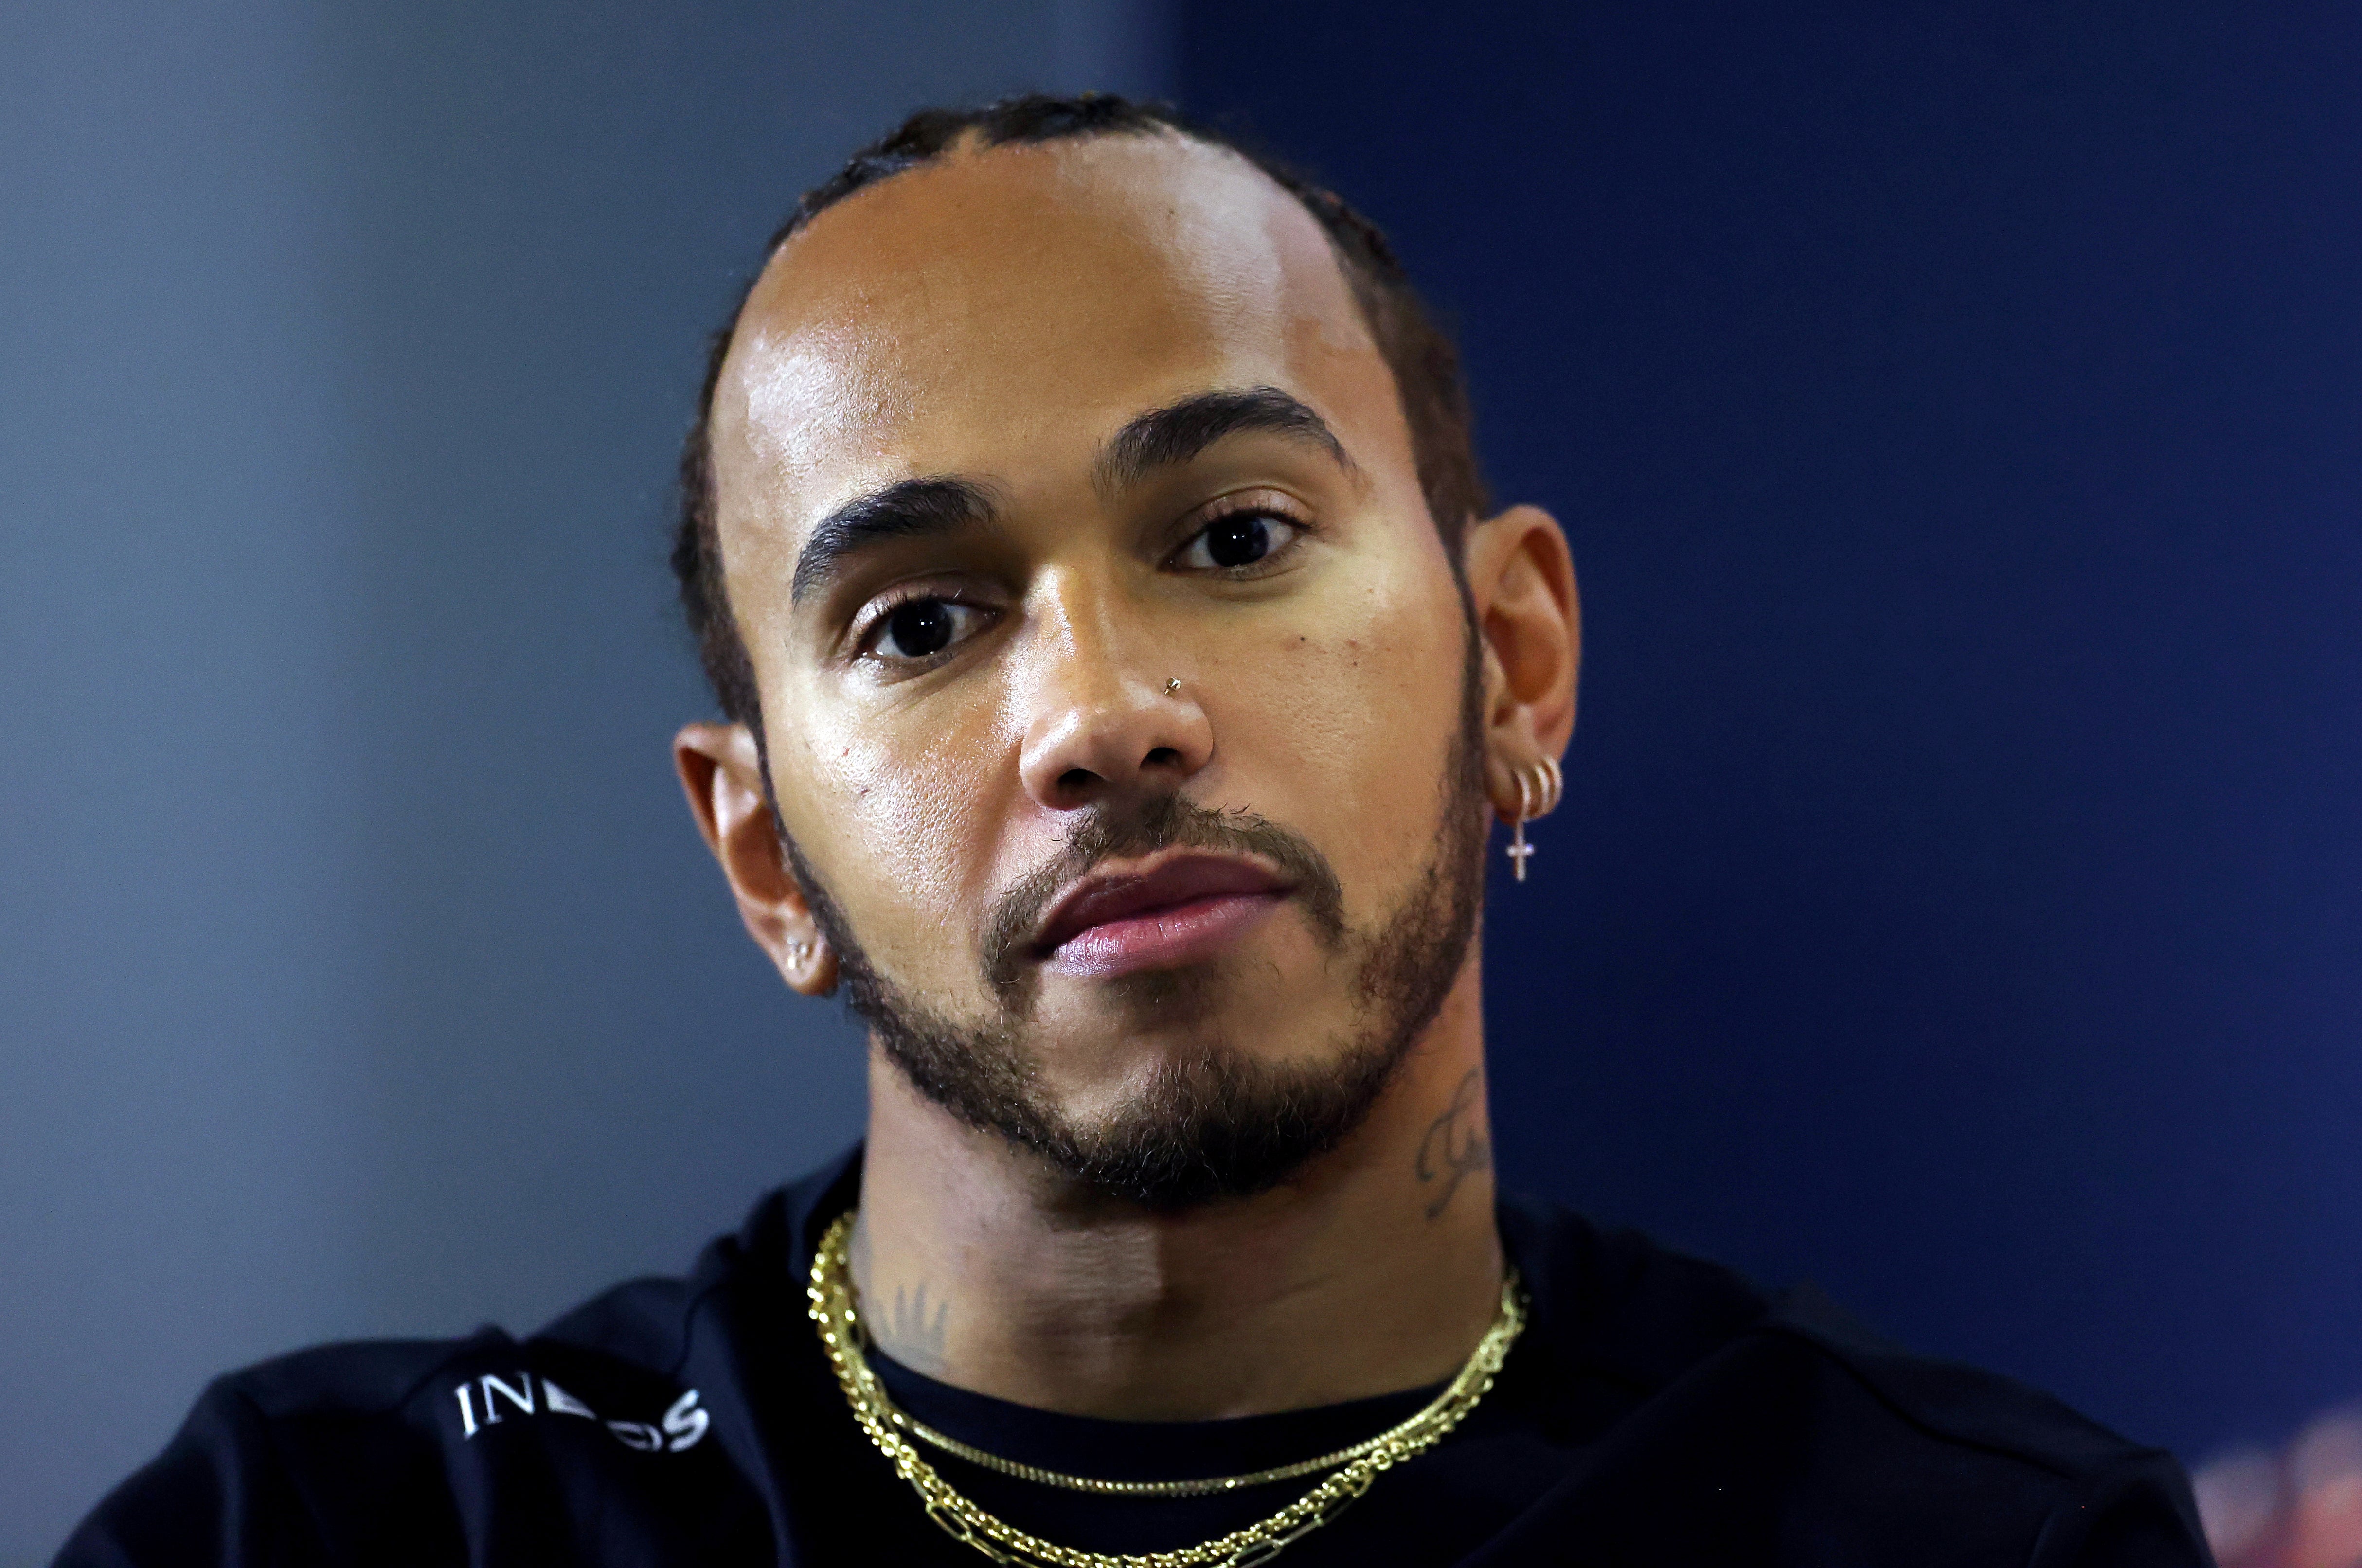 Hamilton is challenging for a record eighth world title